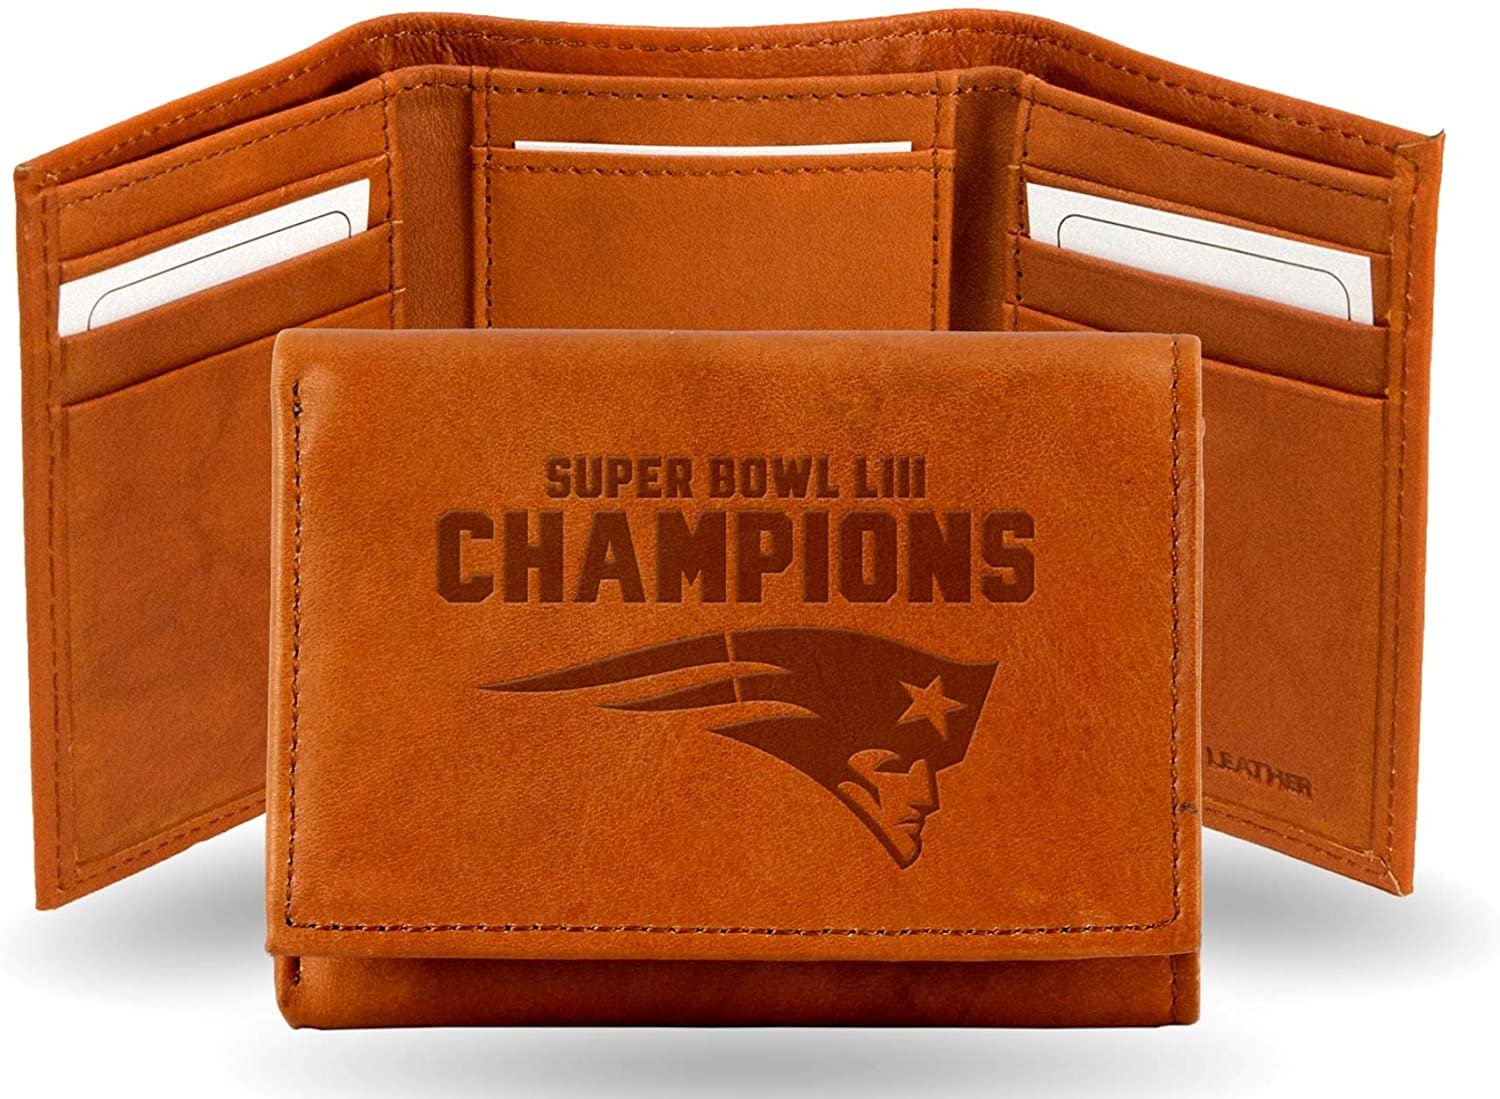 New England Patriots Super Bowl LIII Champions Premium Brown Leather Wallet, Trifold, Embossed Laser Engraved